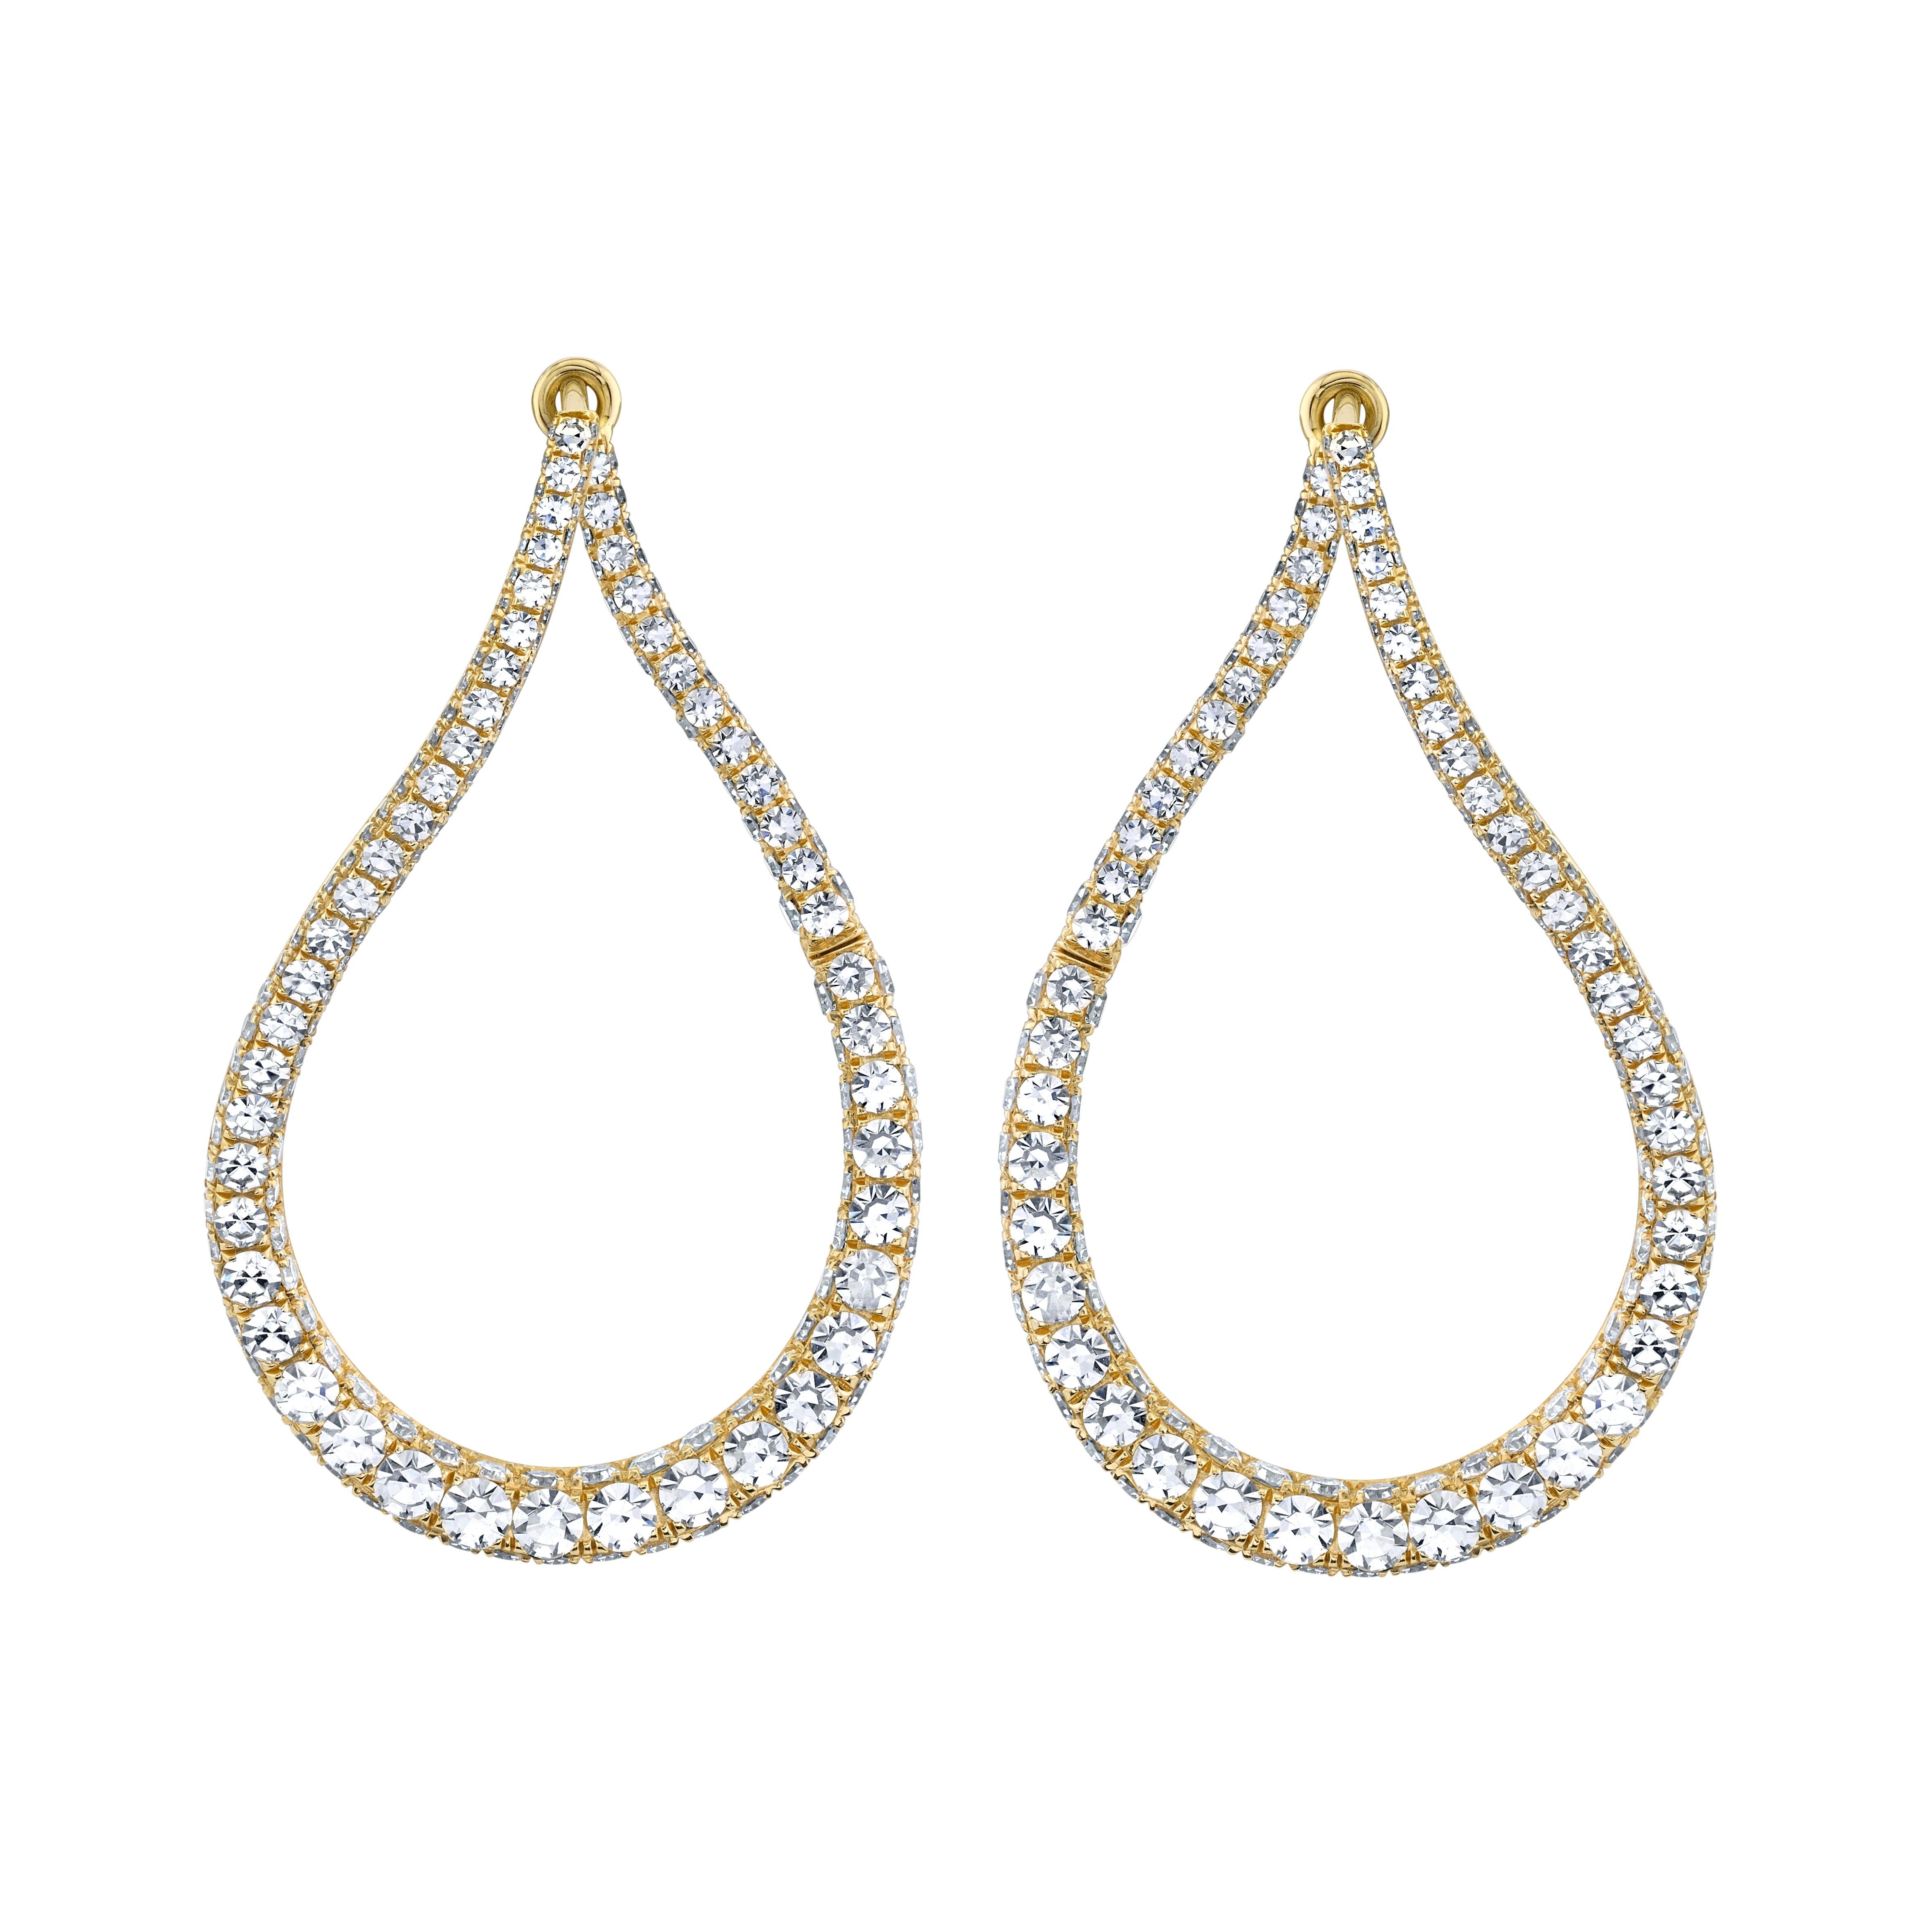 Beautiful and elegant diamond twist hoops featuring 5.67 carats of single-cut white diamonds set in 18 karat rose gold. Elaborate design of white diamonds surround the entire front portion of the earrings, allowing for sparkle from different angles.